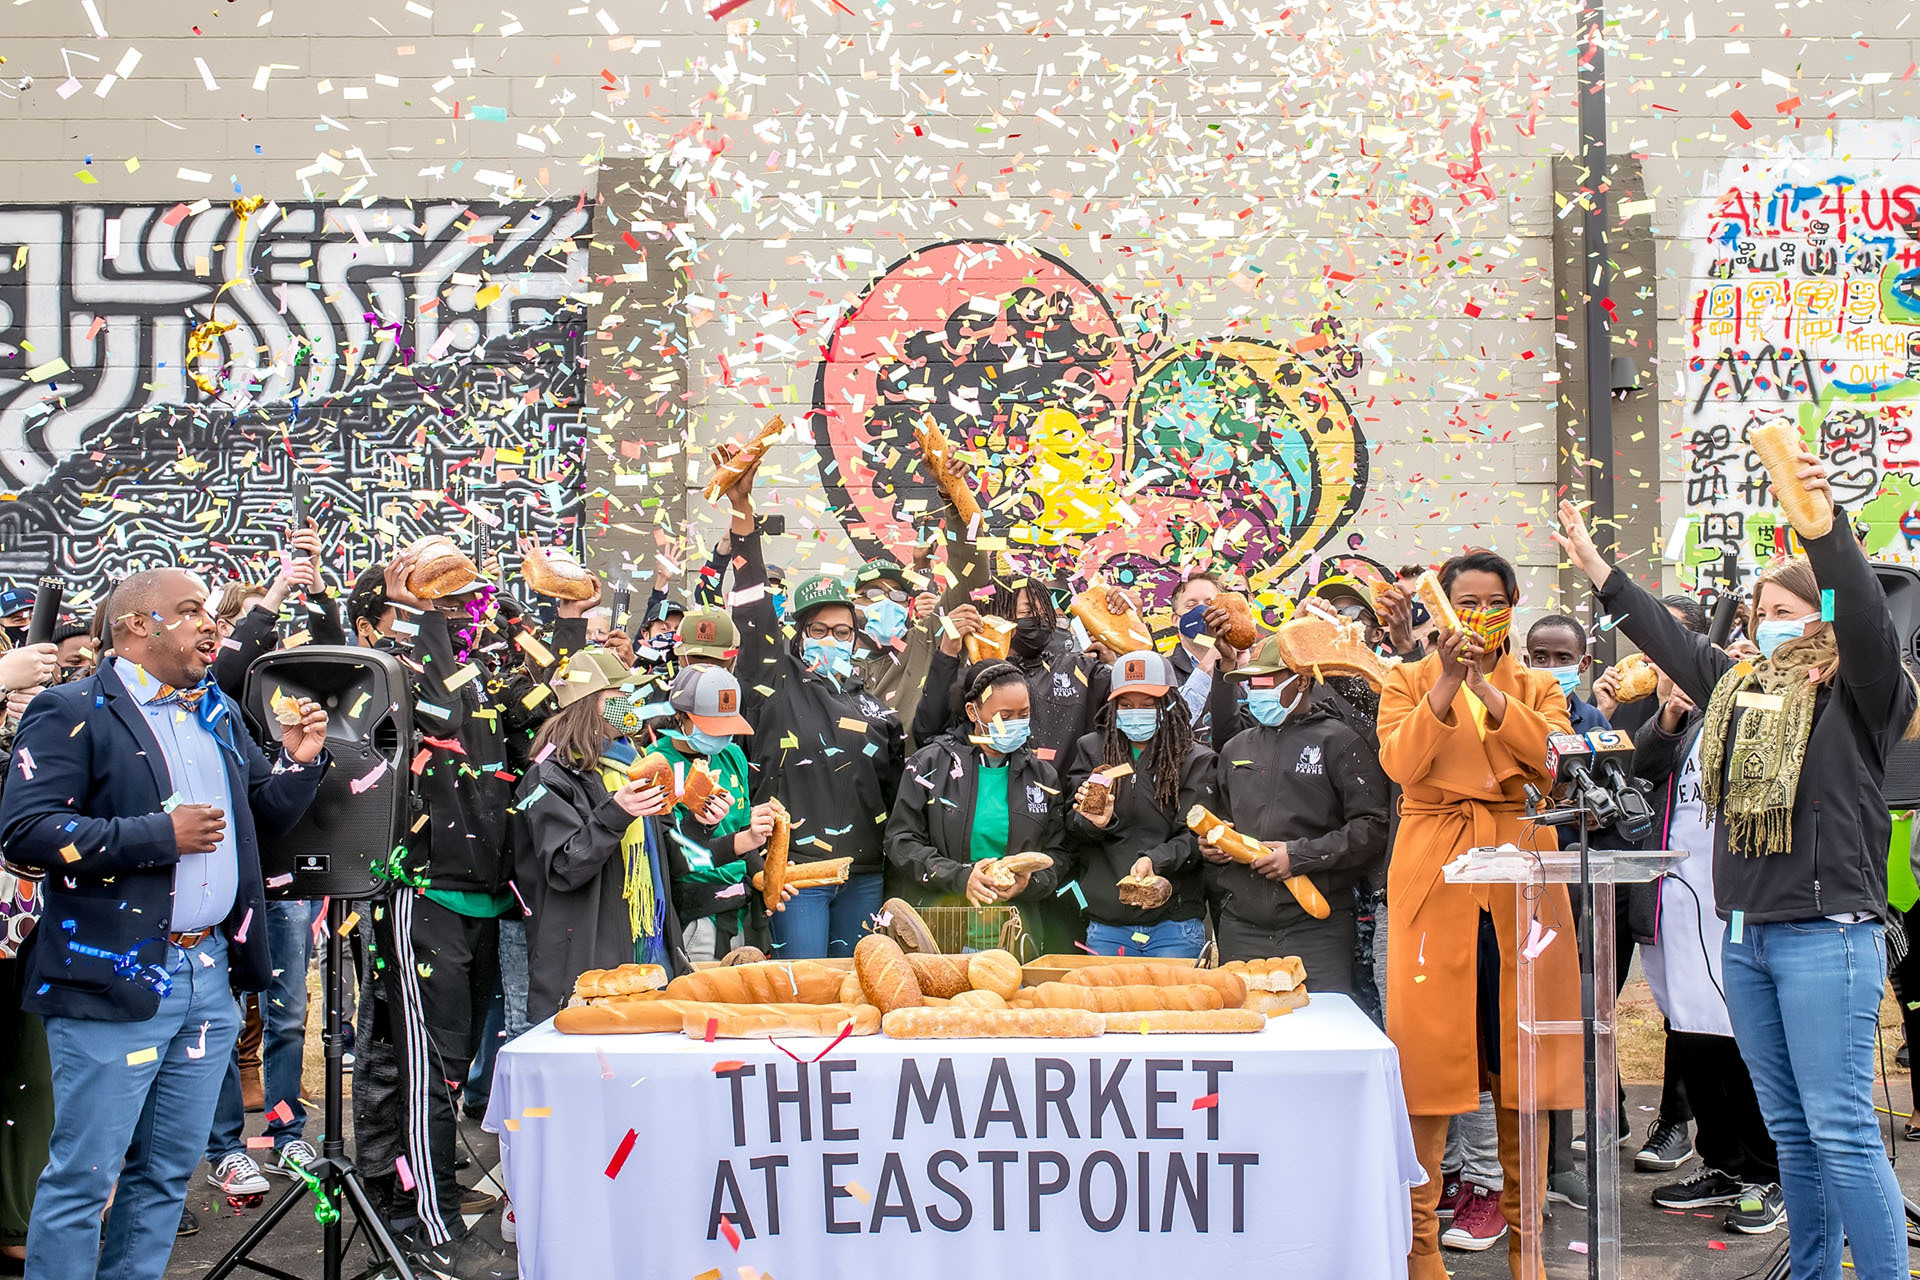 Grand opening of The Market at Eastpoint